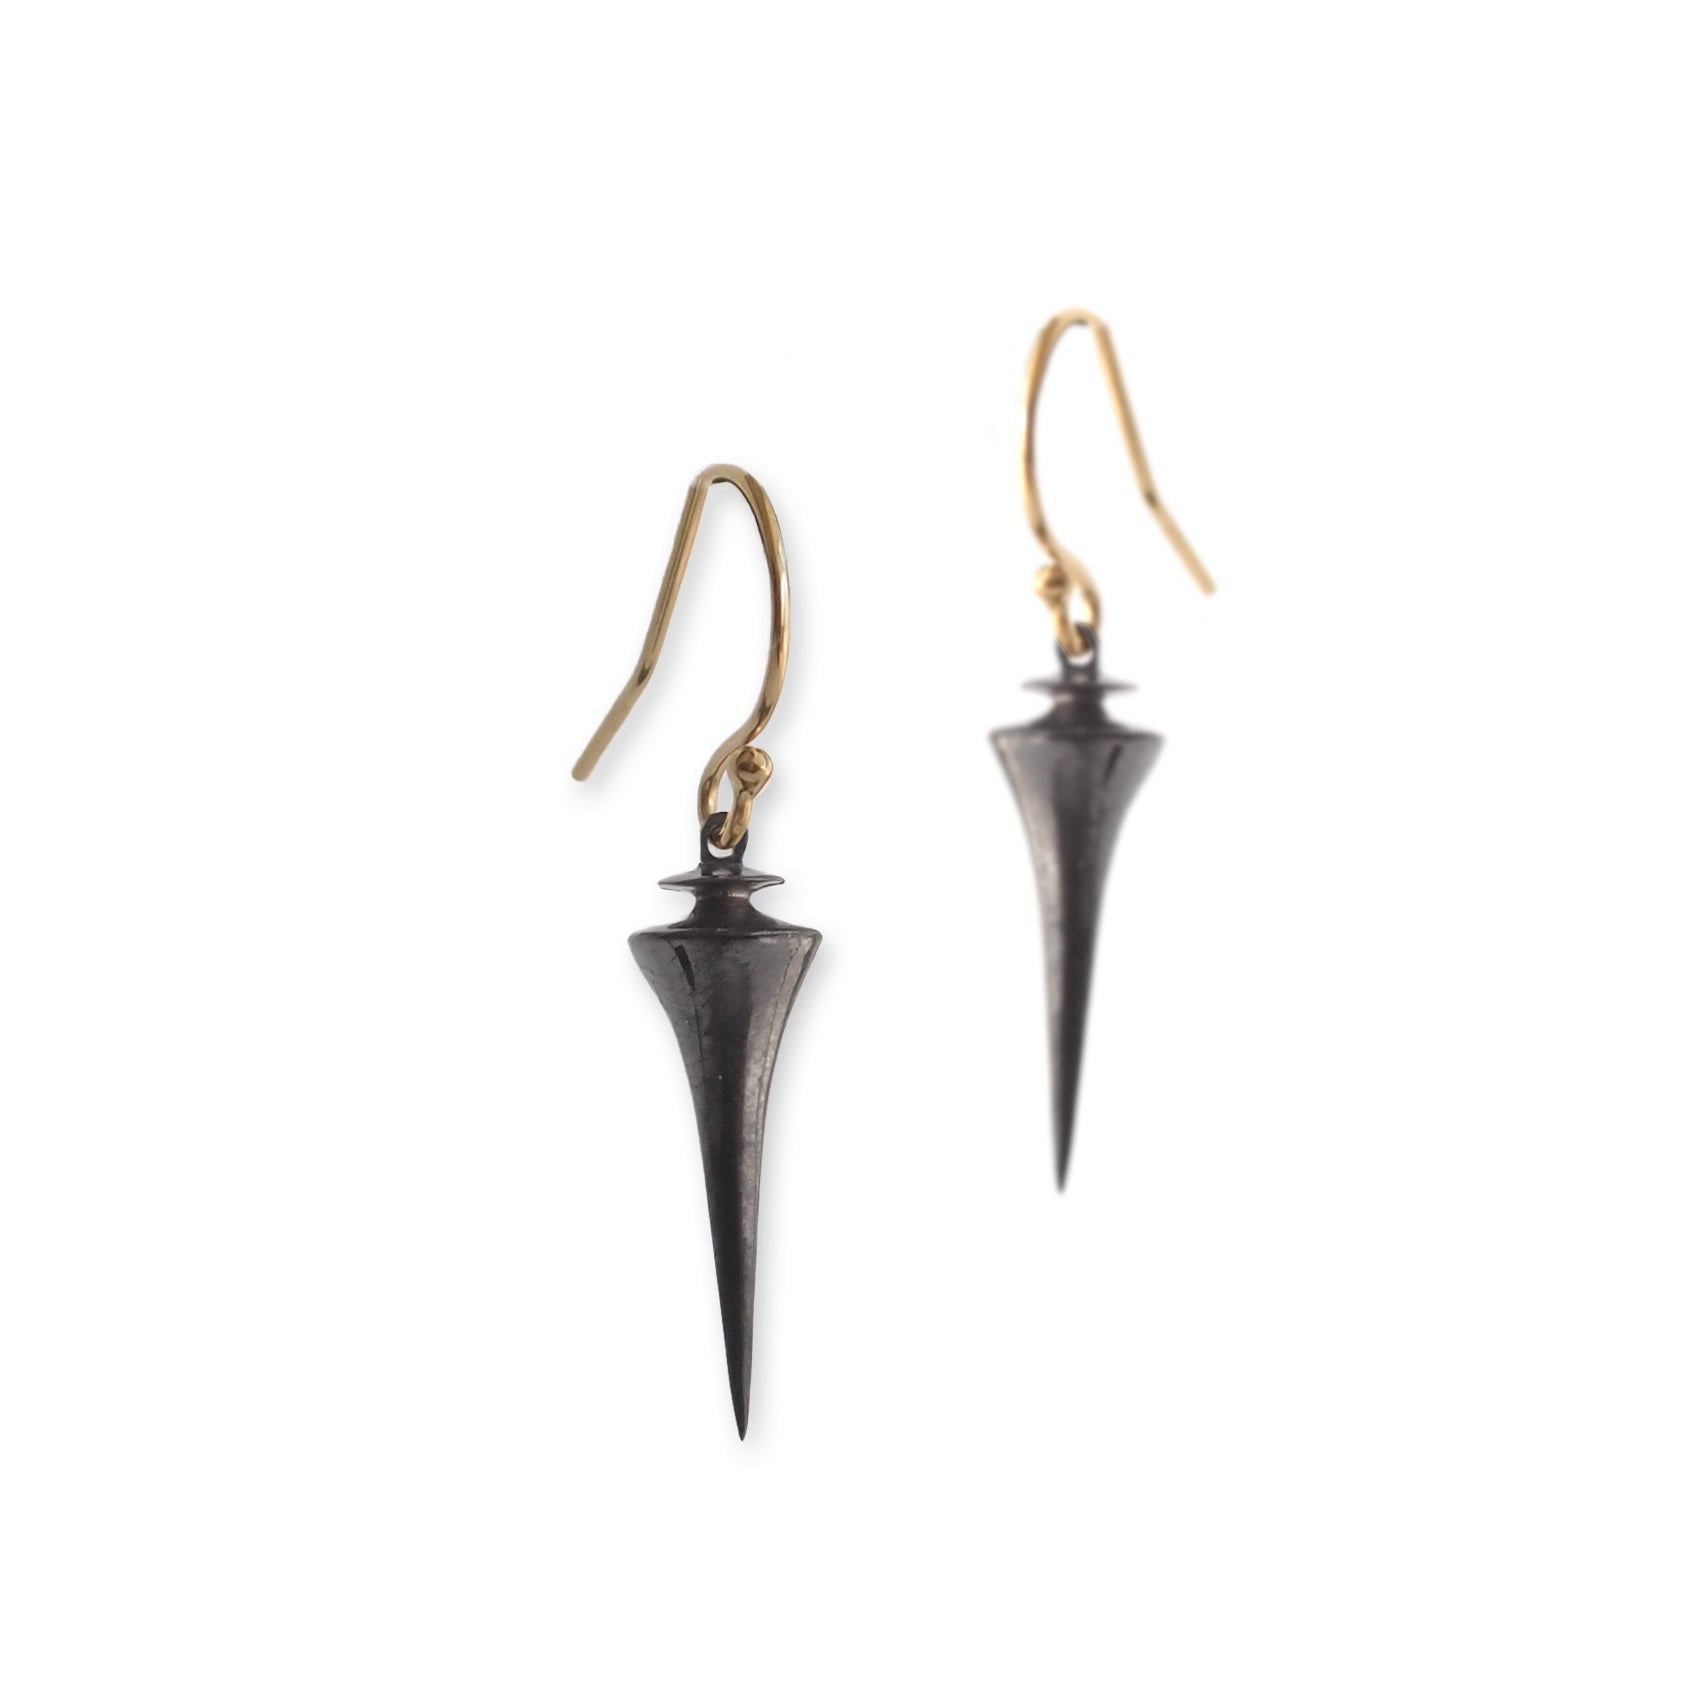 sterling silver plated in black rhodium with 14k yellow gold earwires plomb point earrings